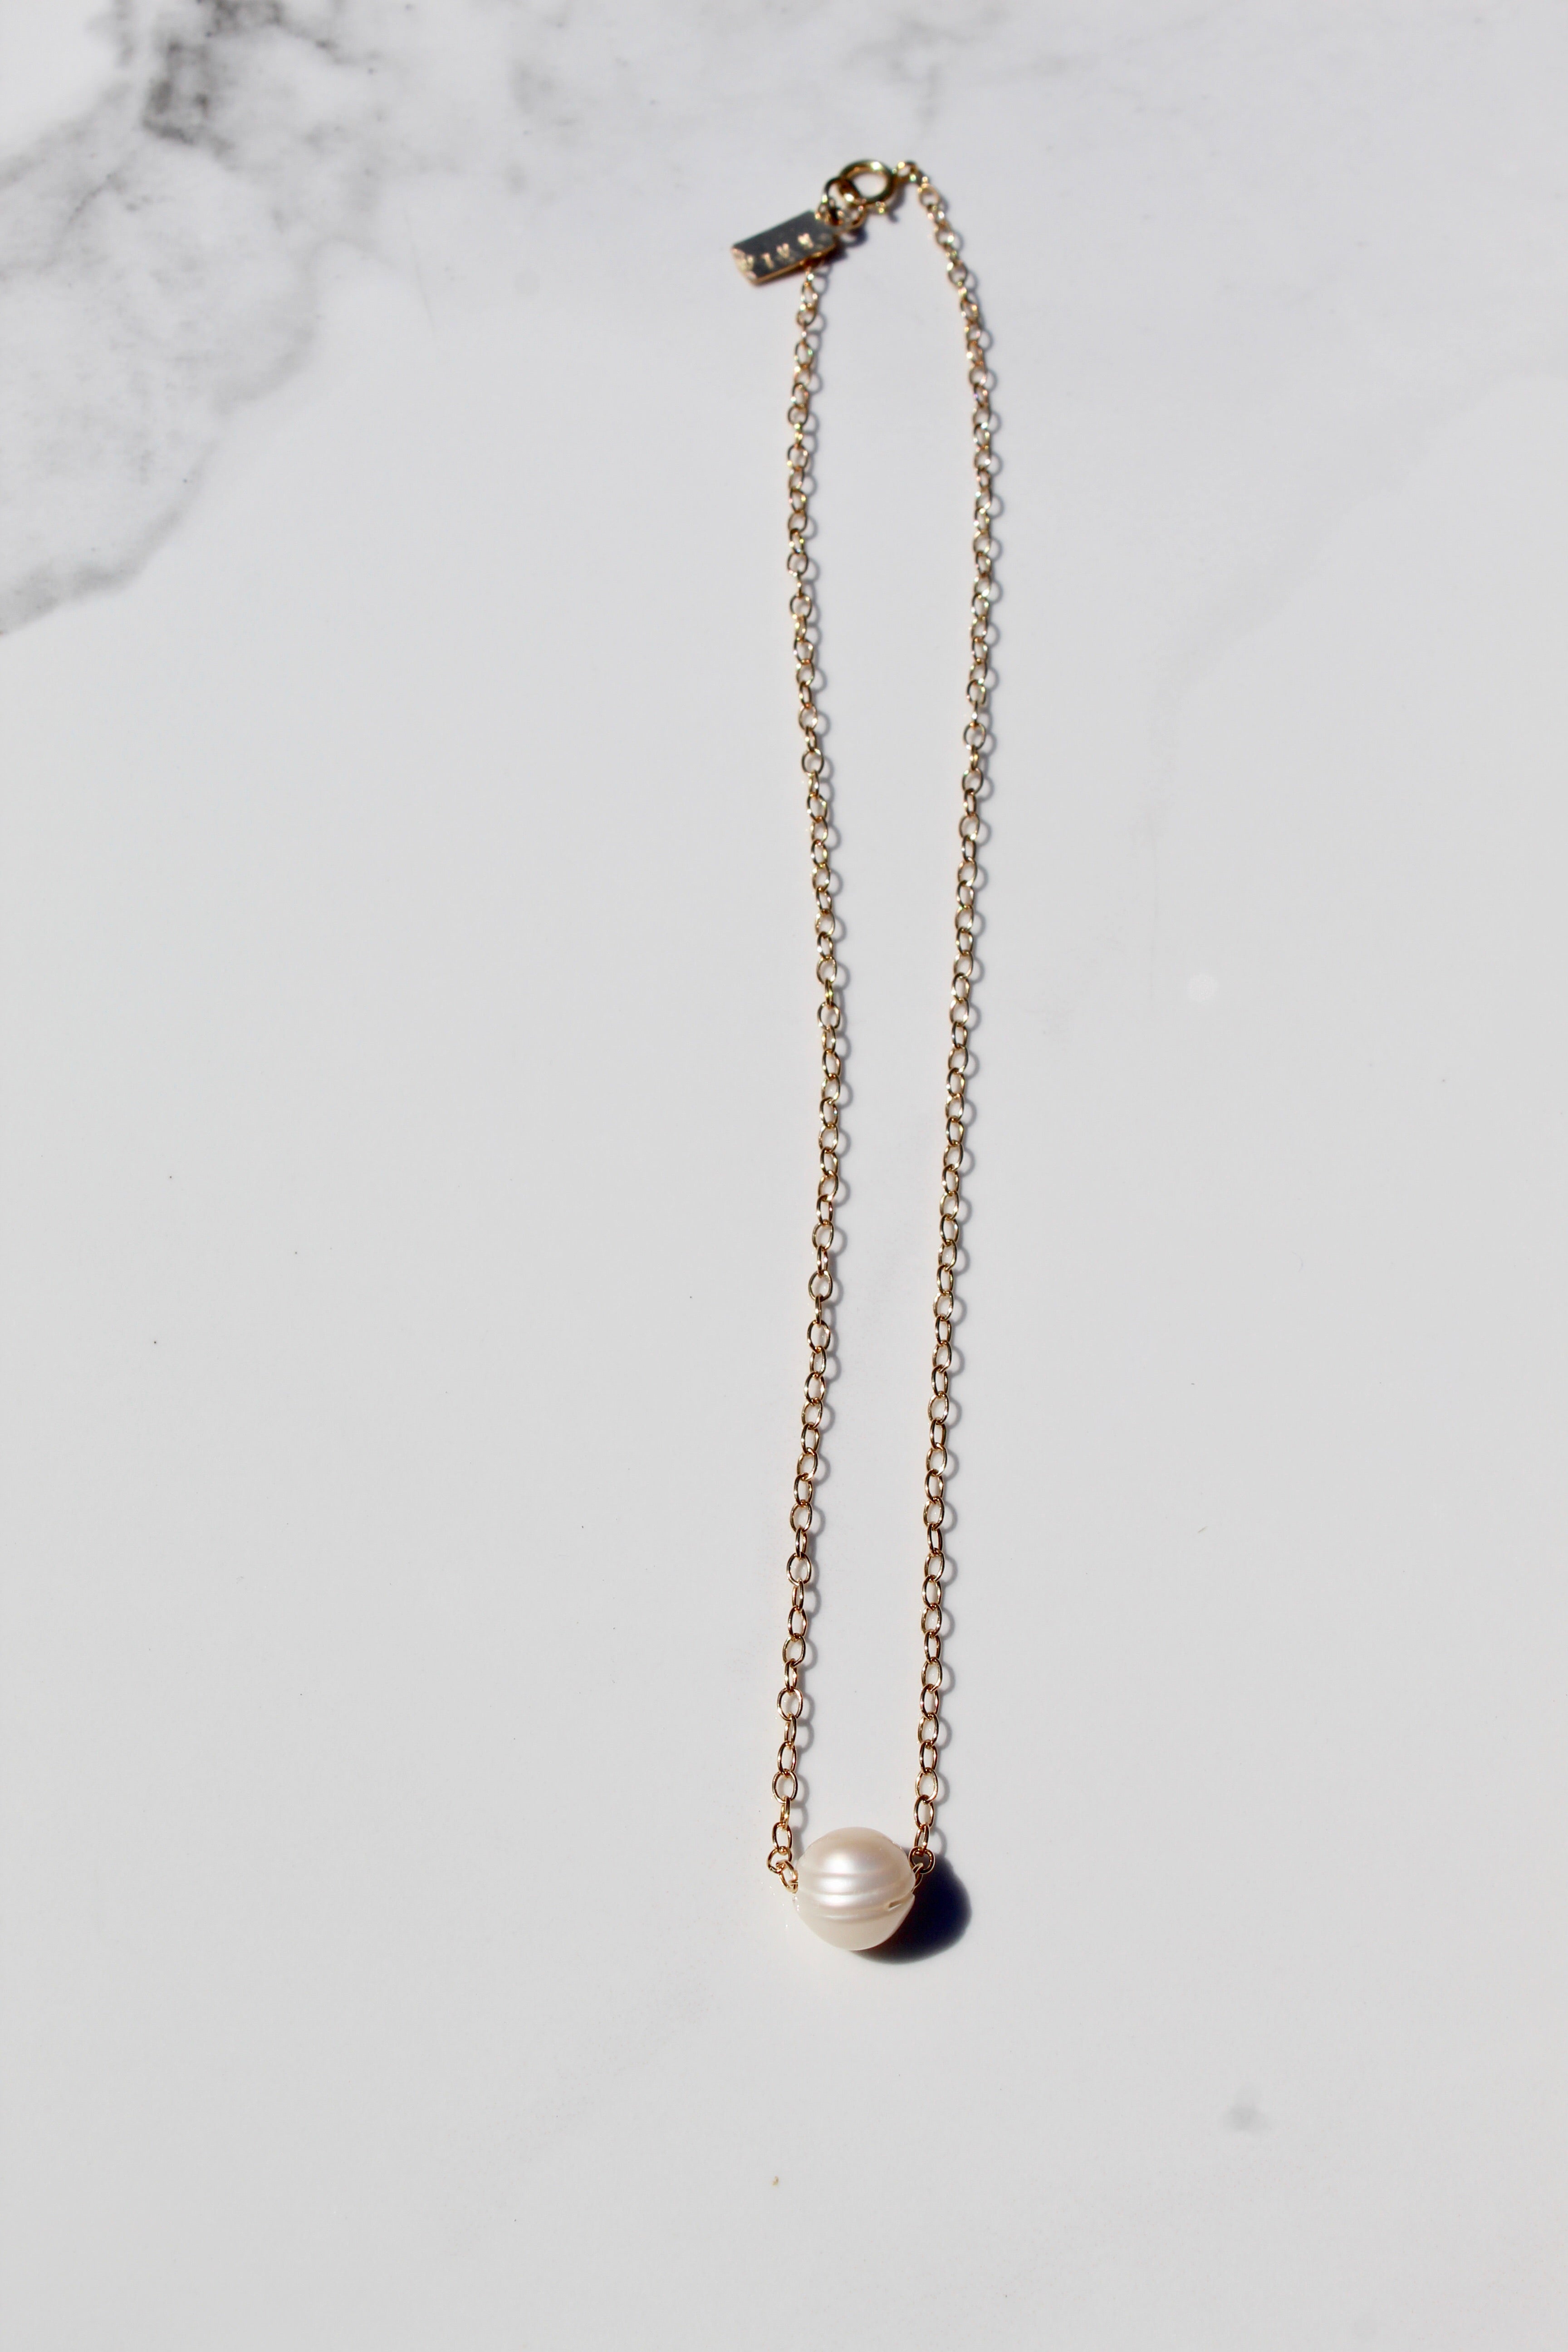 Floating pearl necklace